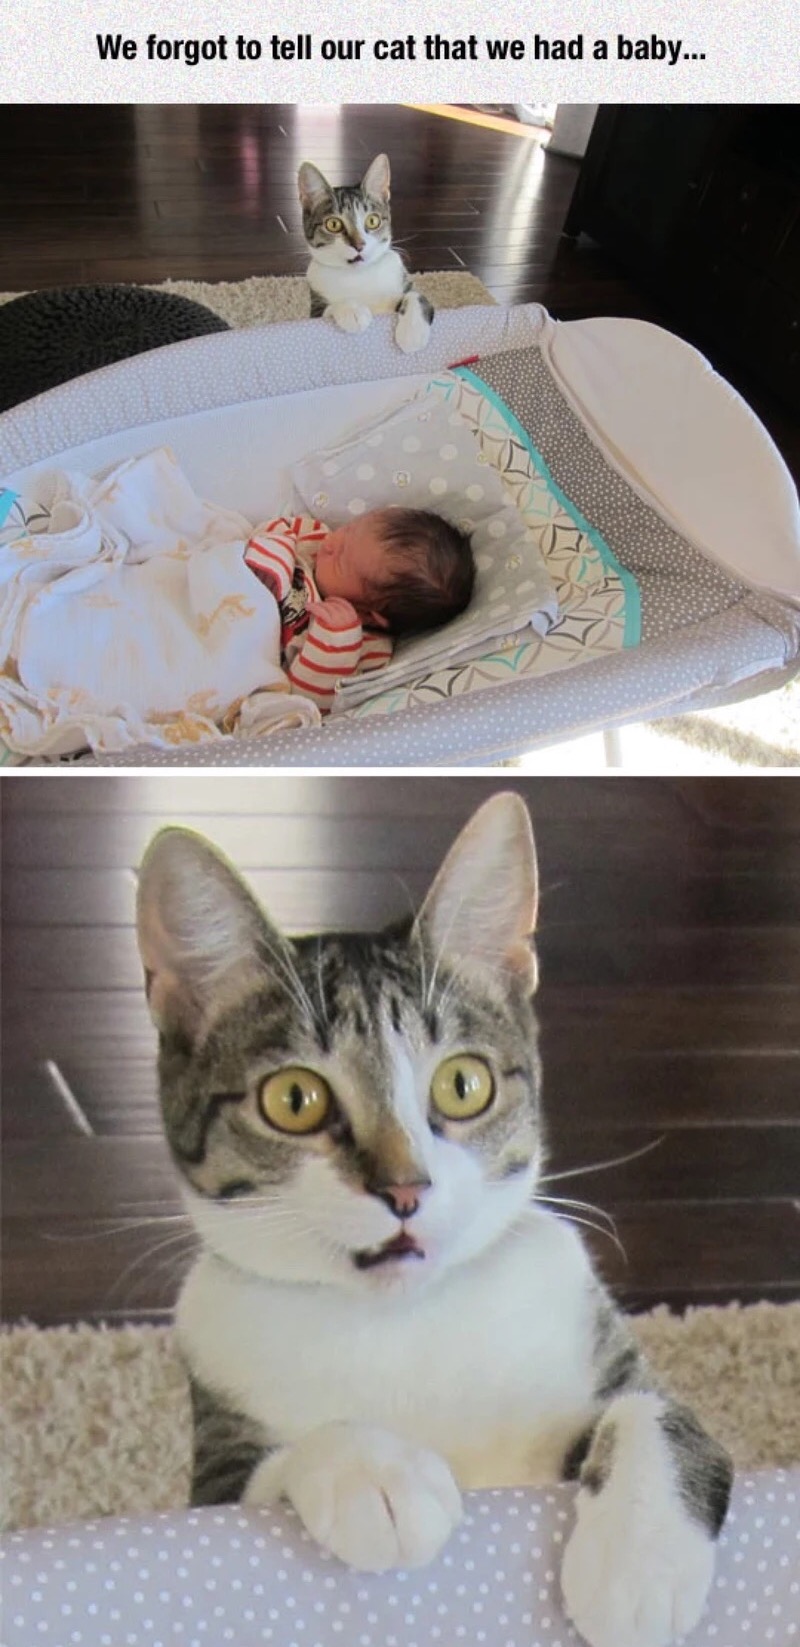 we forgot to tell the cat - We forgot to tell our cat that we had a baby...